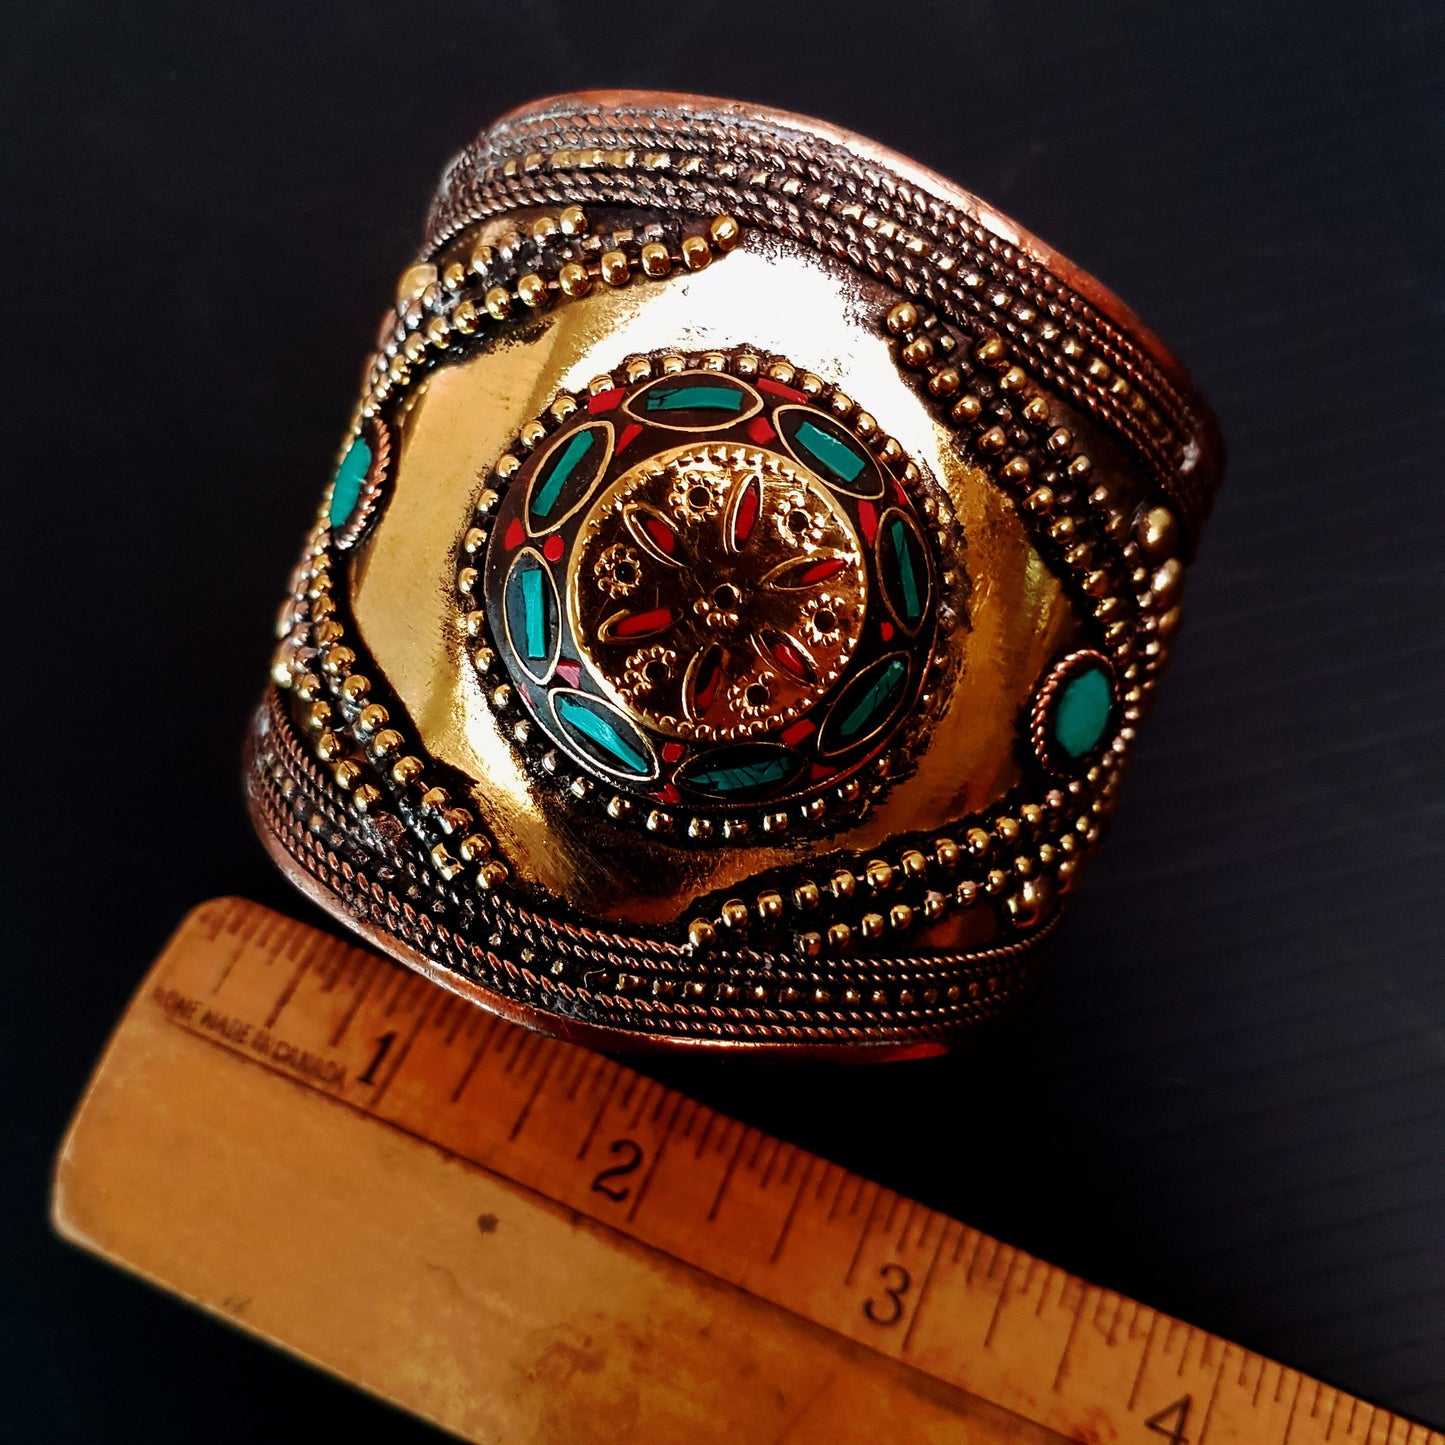 Vintage medieval style bronze cuff bracelet. Set with Tibetan turquoise & coral stones. Spectacular gender neutral golden tone armour cuff.